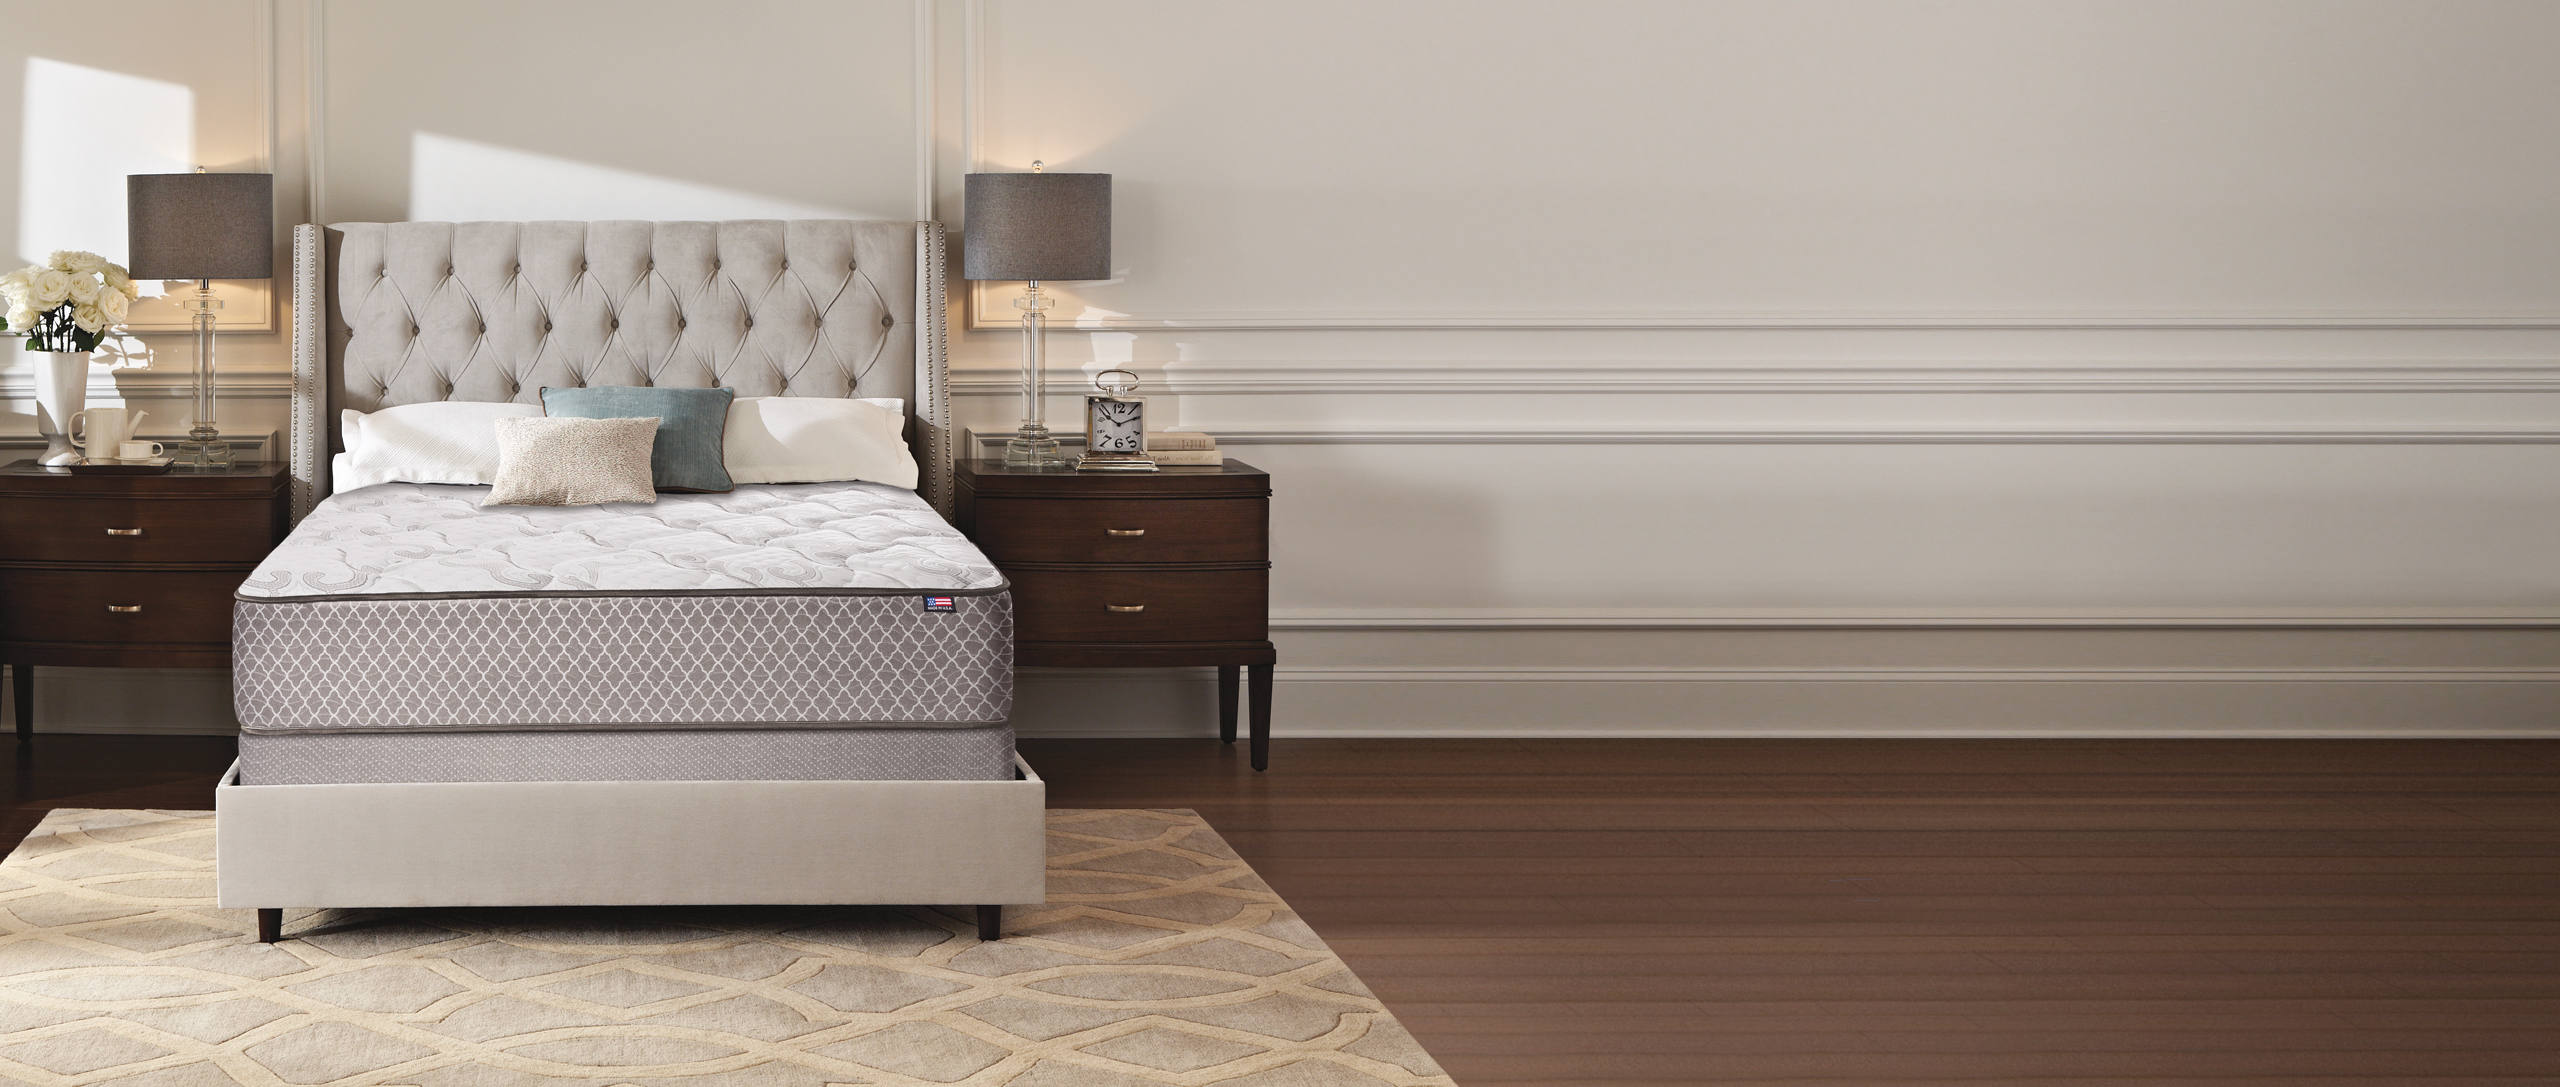 Photo of our Backsense mattress in a bedroom setting